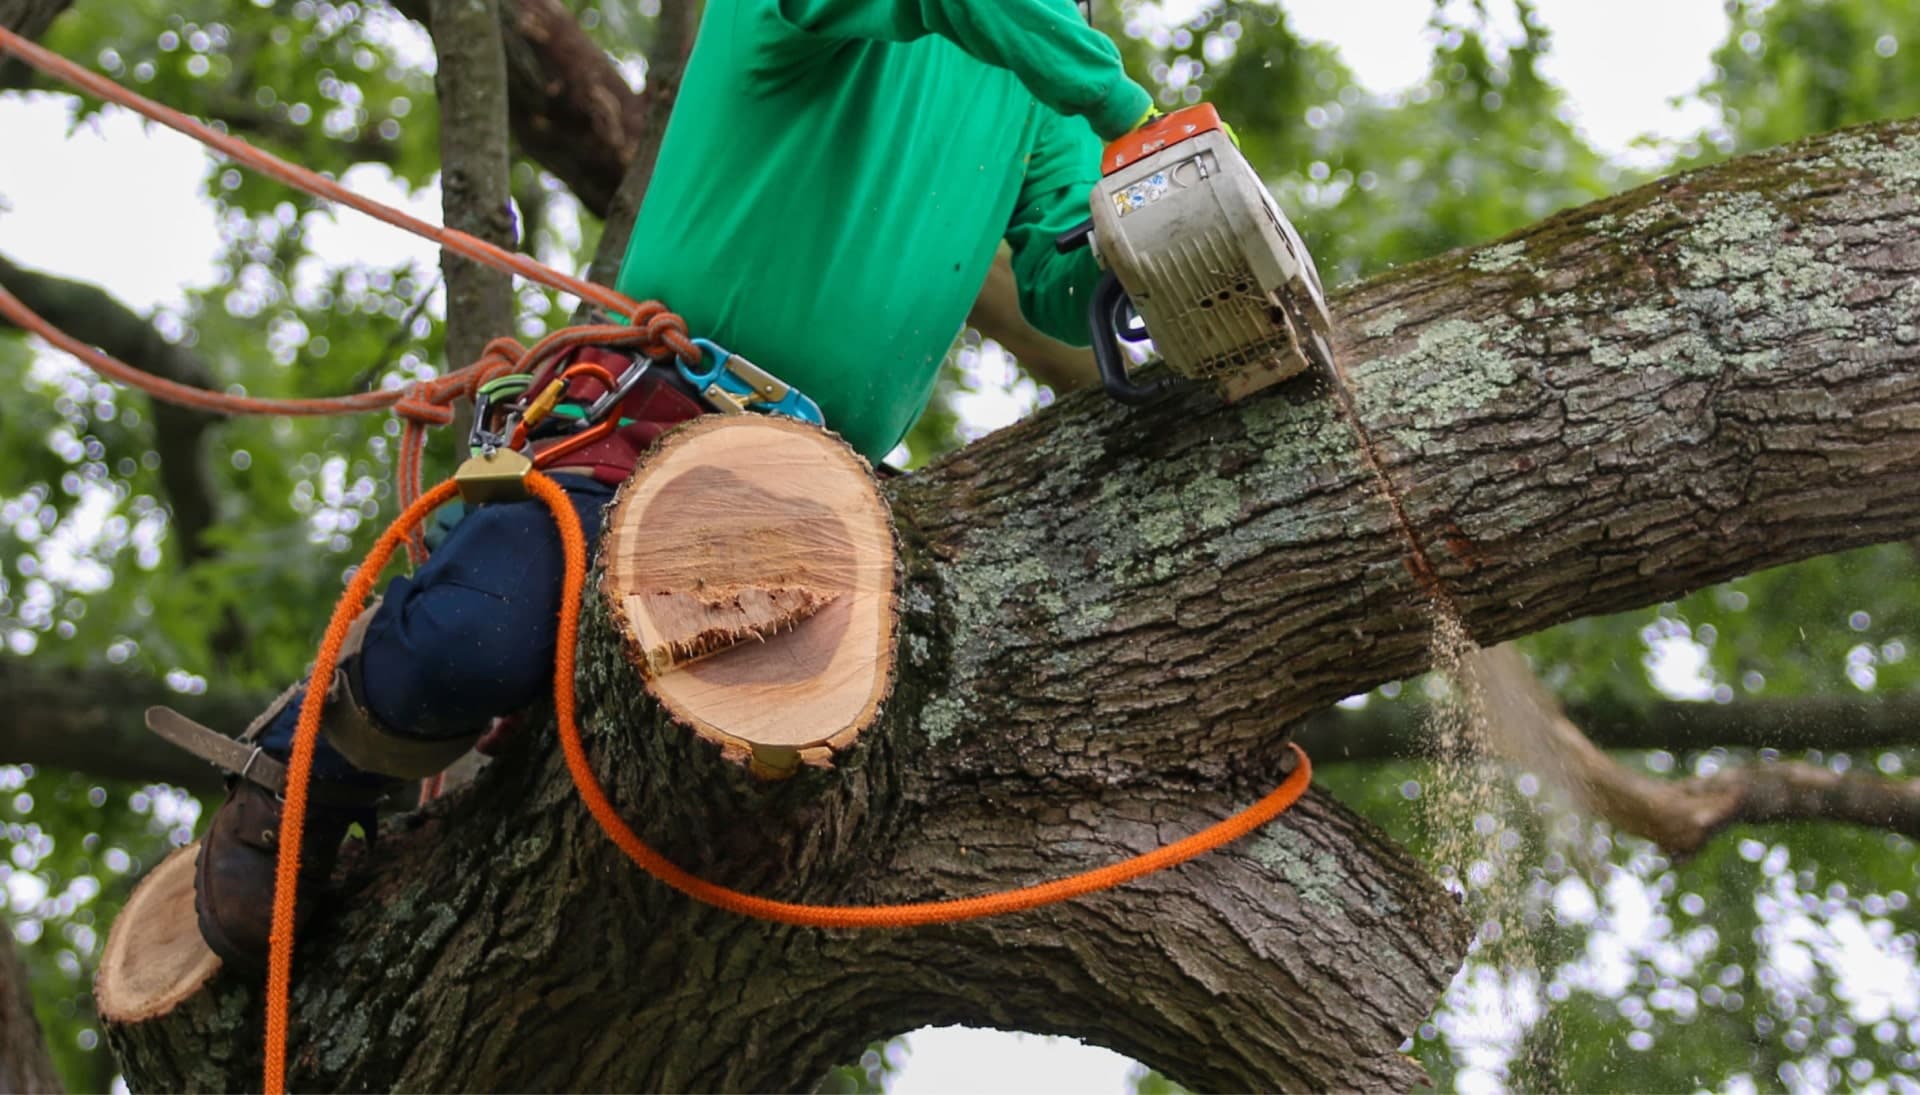 Shed your worries away with best tree removal in Sacramento